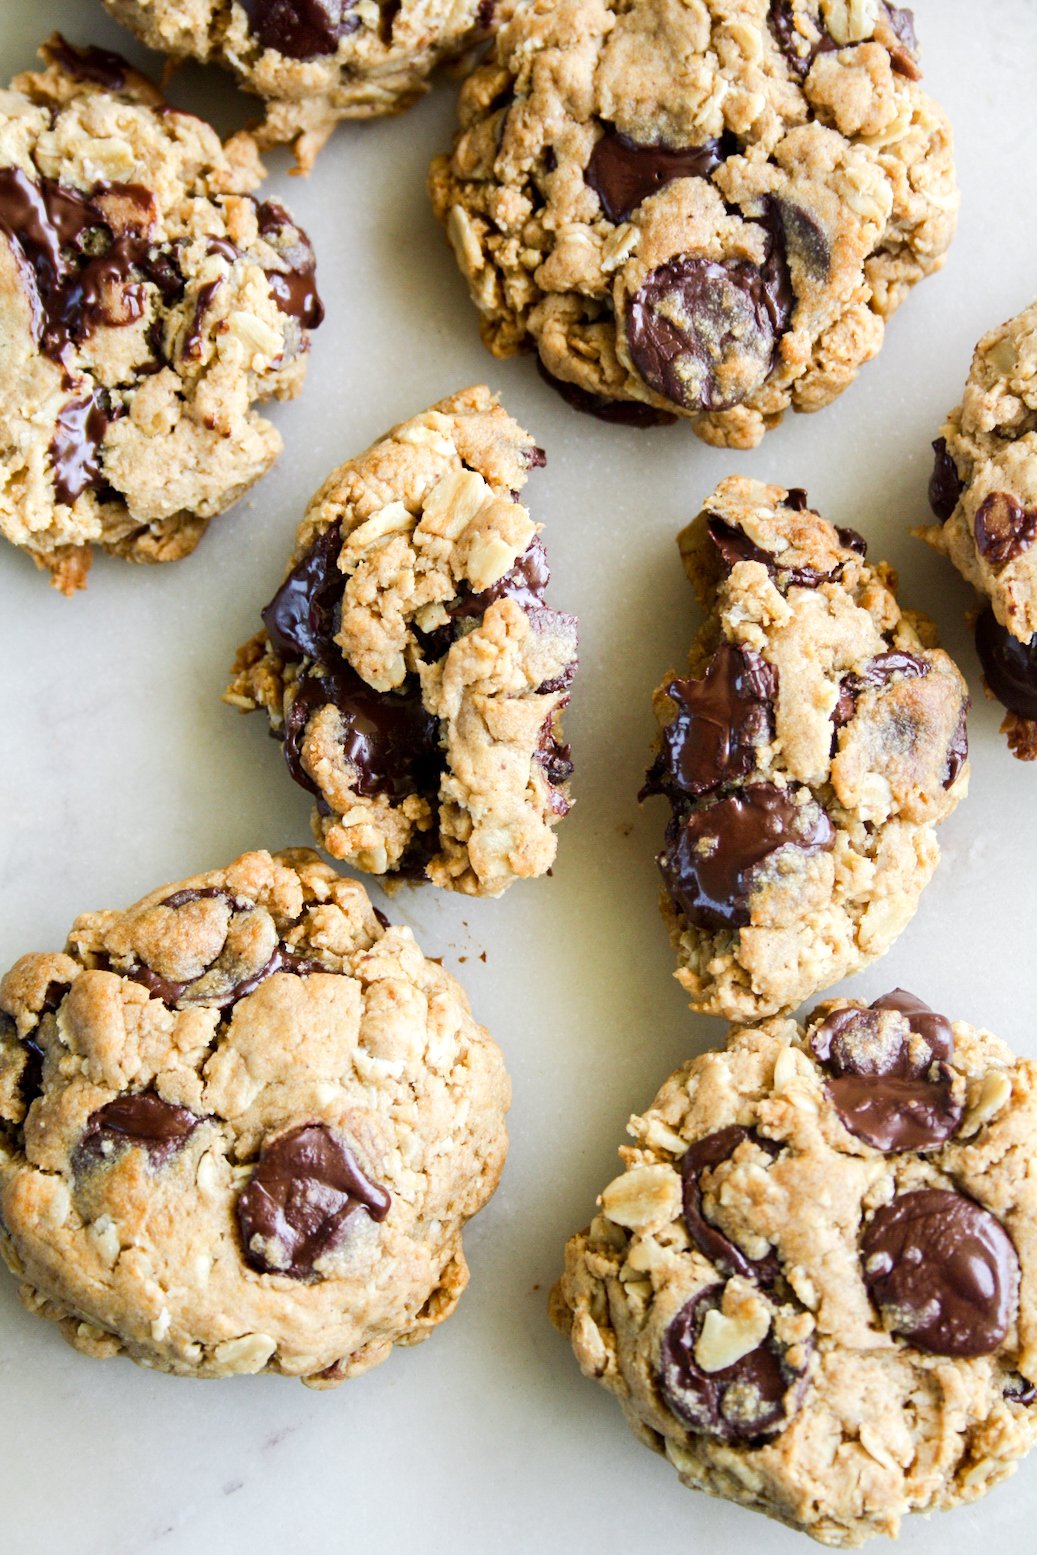 Chewy wholewheat chocolate chip cookies with rolled oats and no eggs